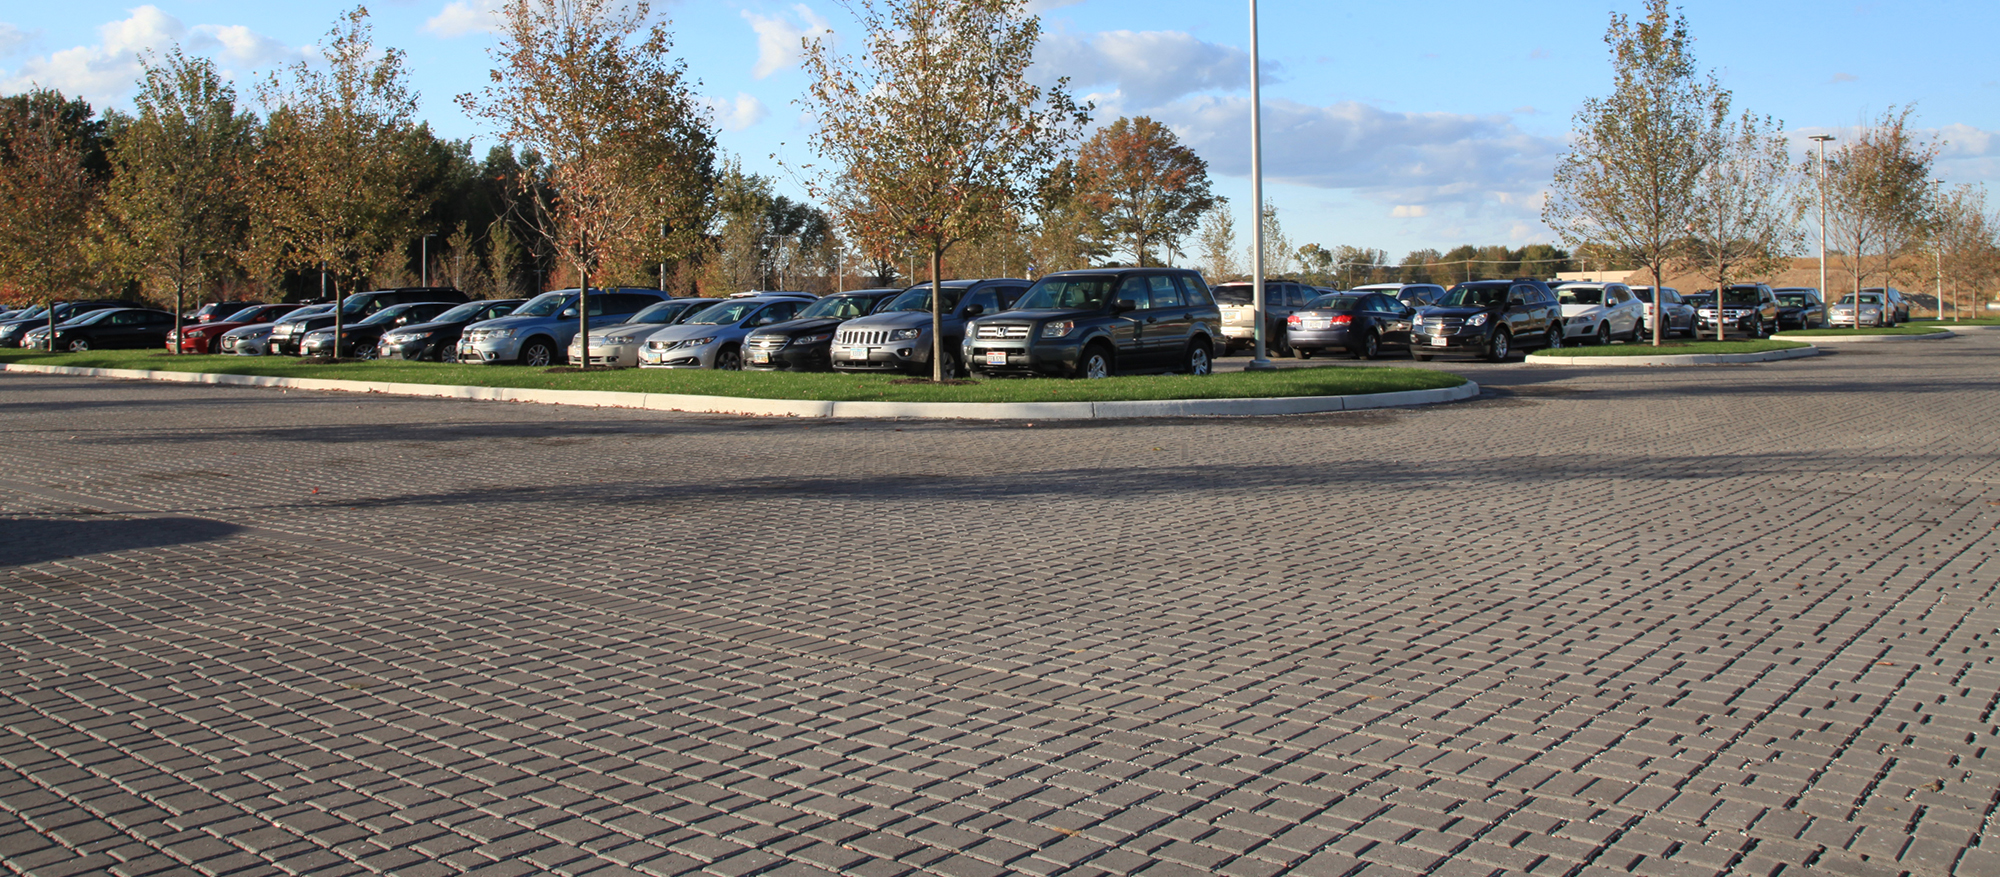 Motor vehicles occupy a busy parking lot at the Cleveland Clinic, featuring a warm dark grey hue of Eco-Optiloc pavers throughout the space.